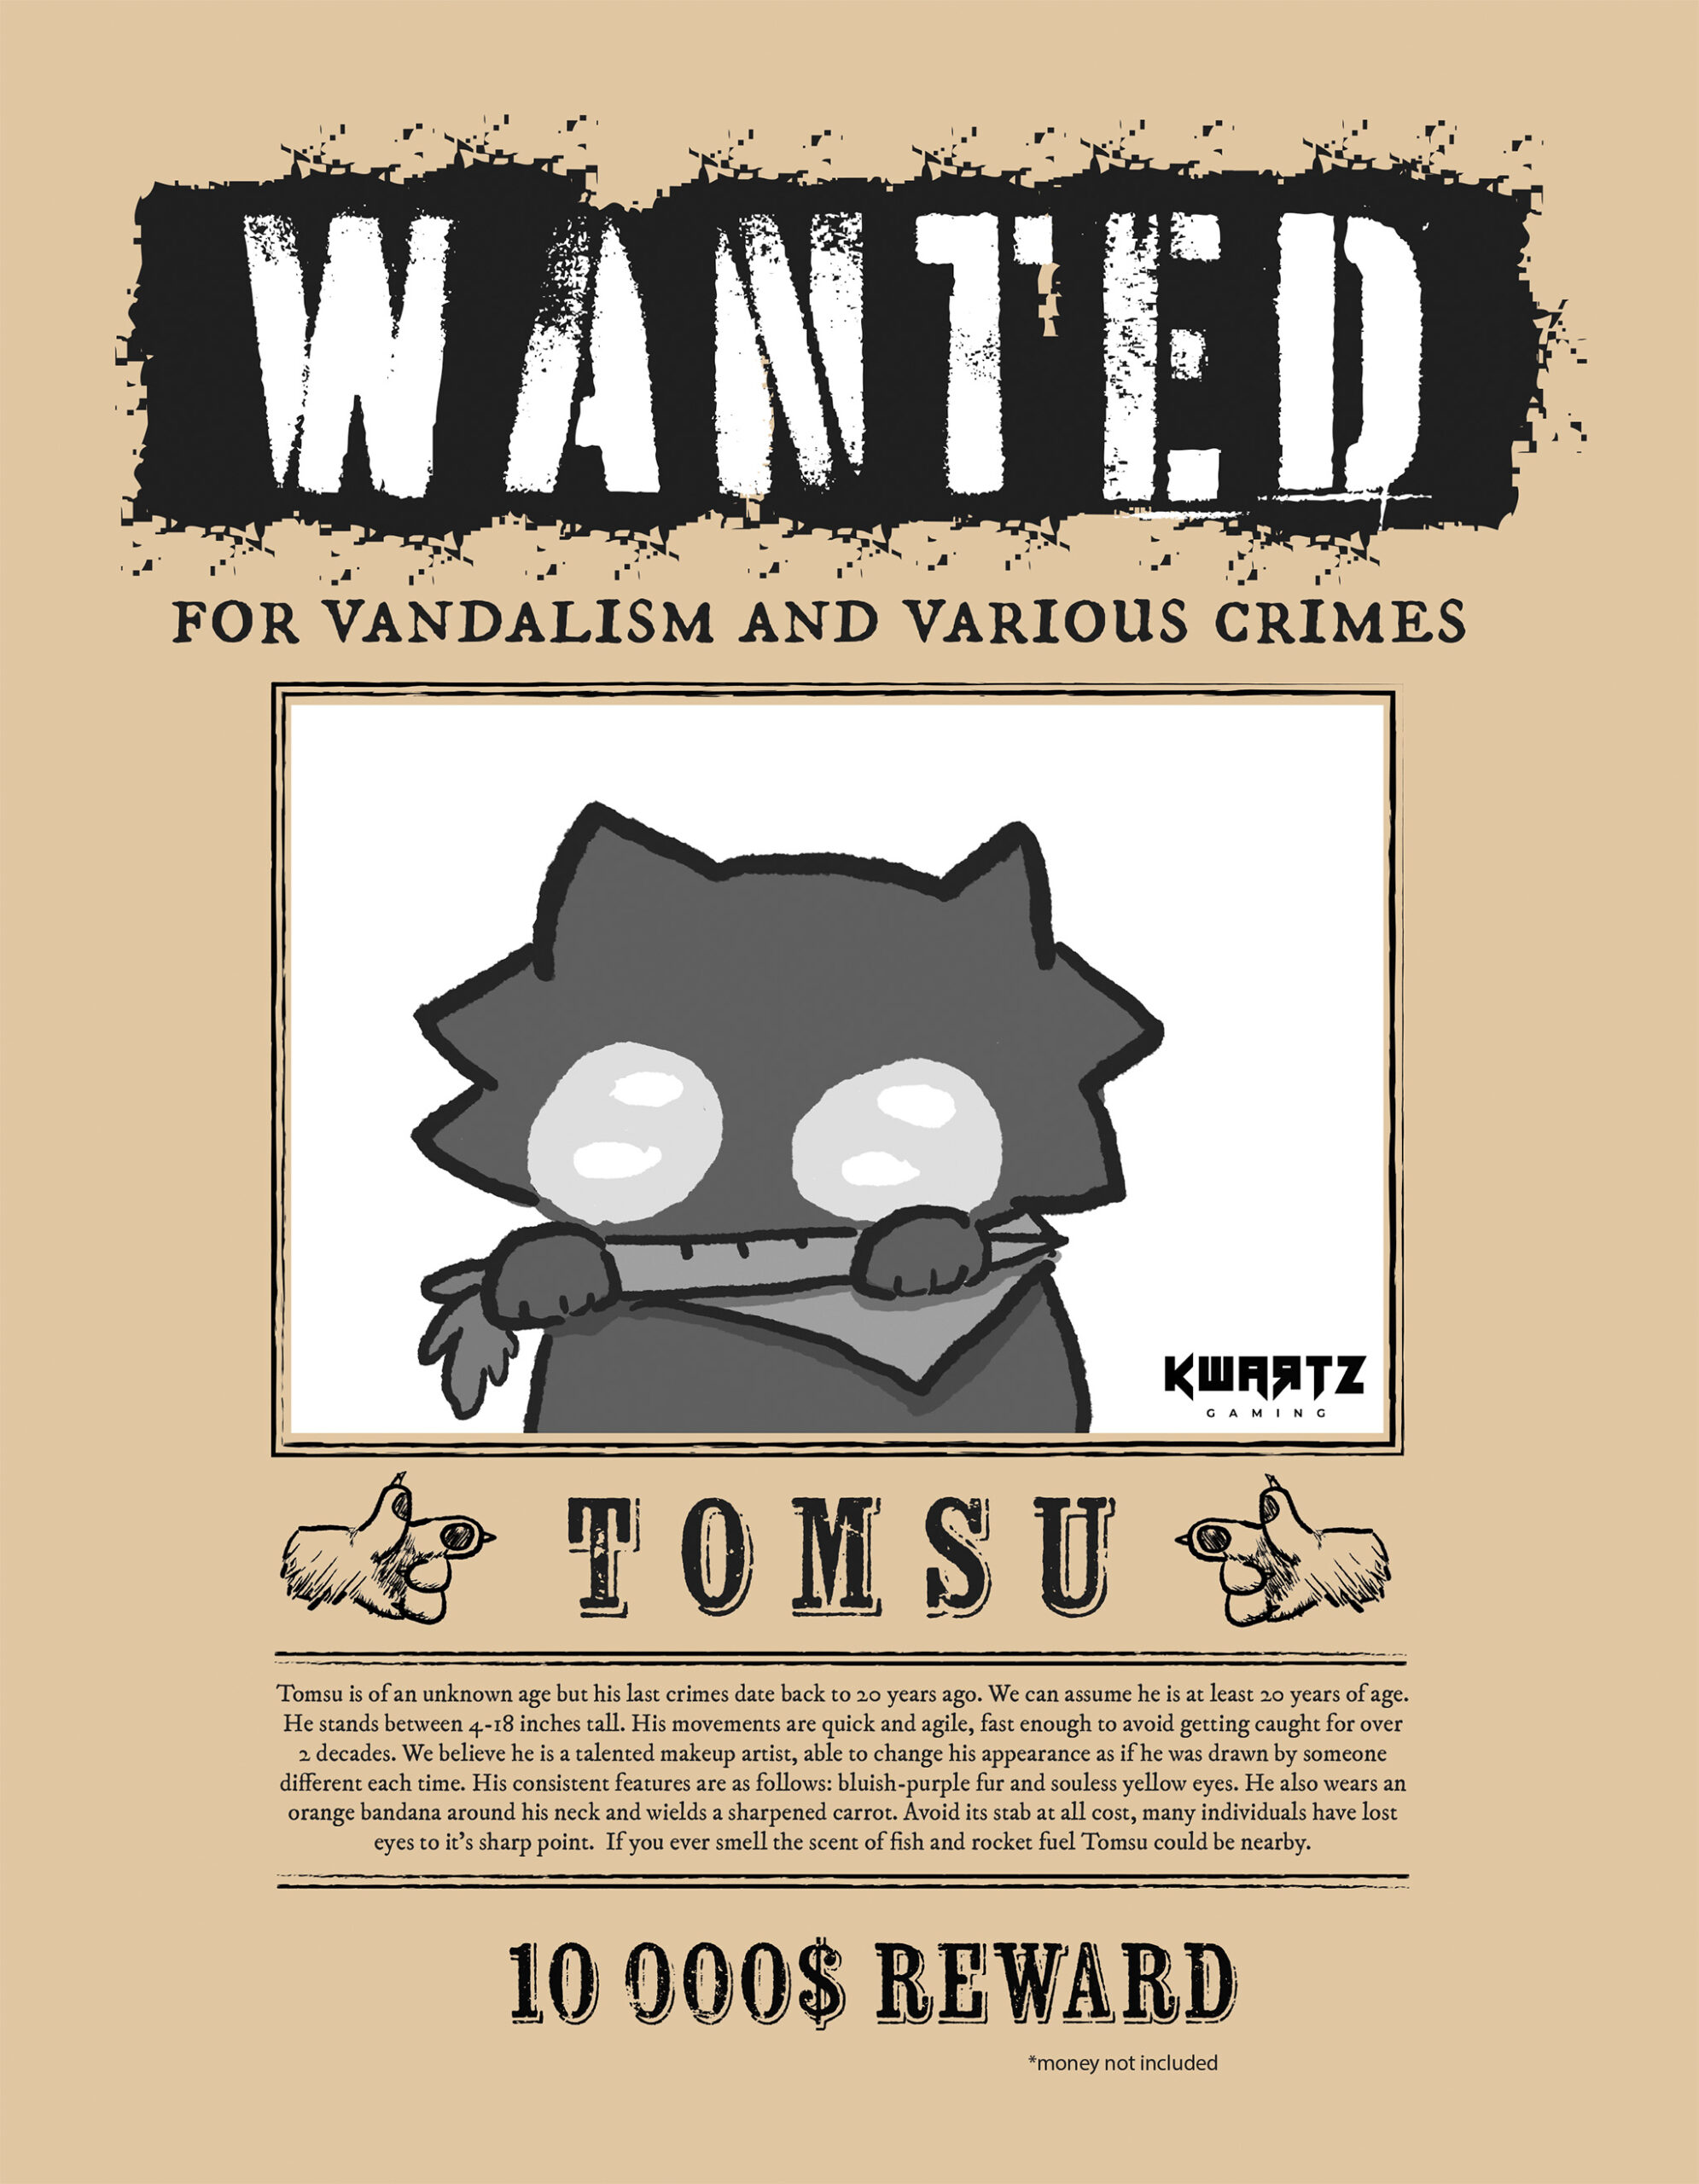 a wanted poster for Tomsu, a cat. Tomsu is wanted for vandalism and various crimes.